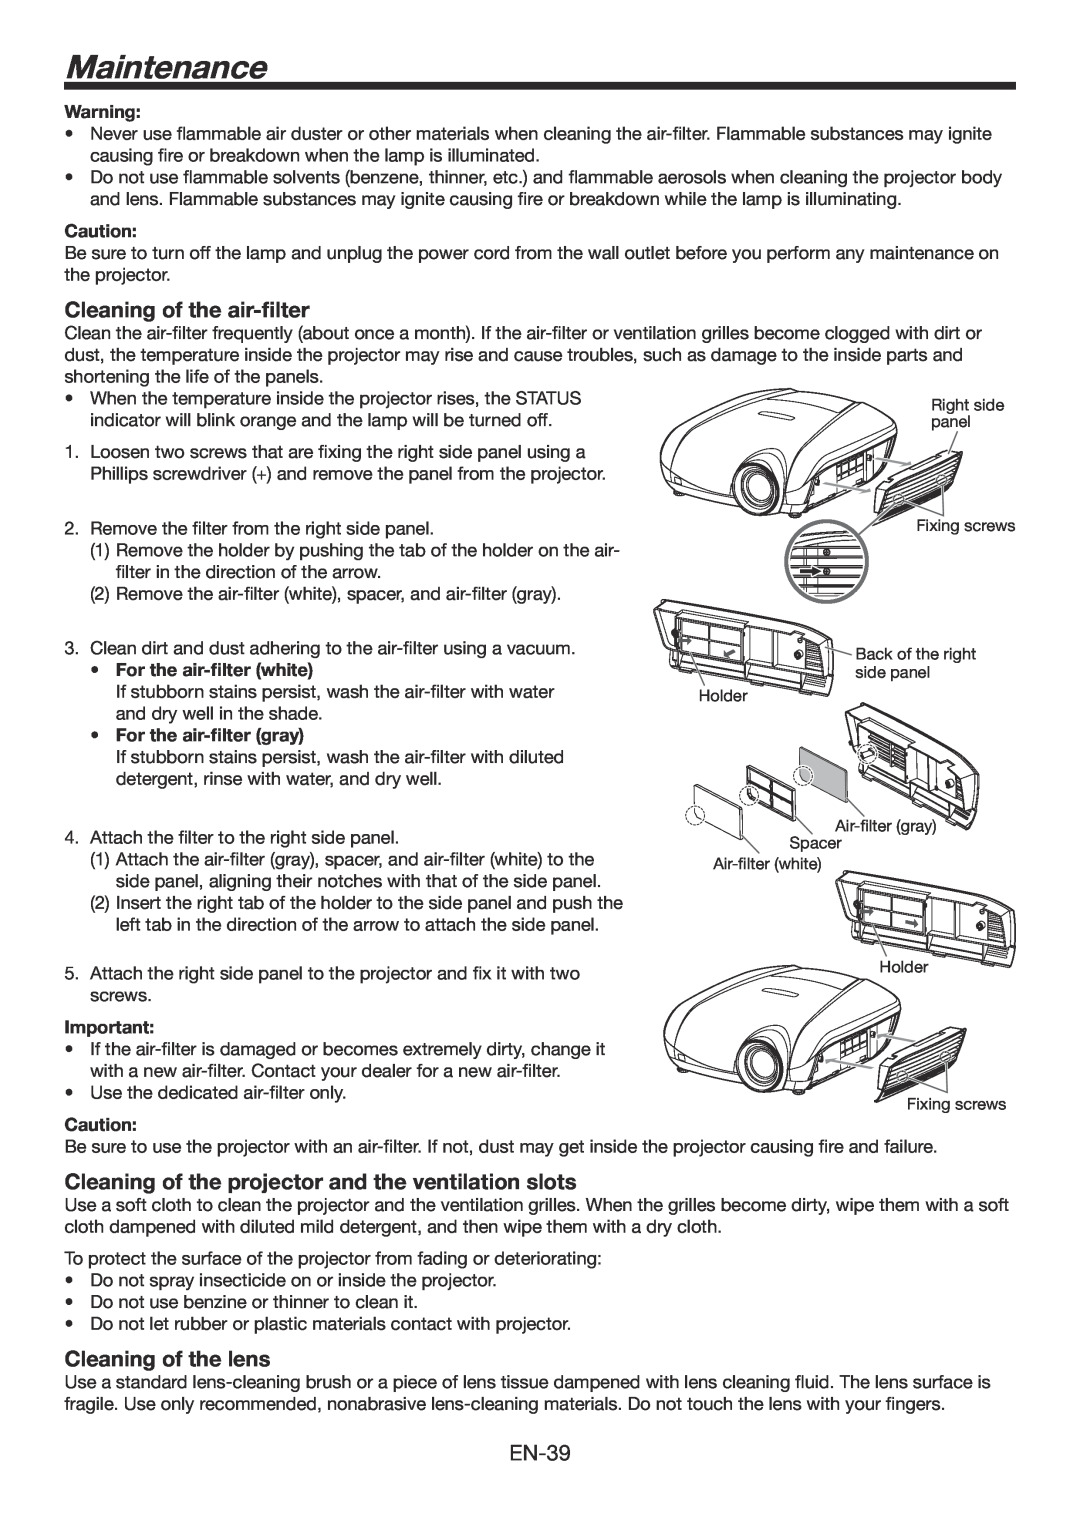 Mitsubishi Electronics HC6800 user manual Cleaning of the projector and the ventilation slots, Cleaning of the lens, EN-39 